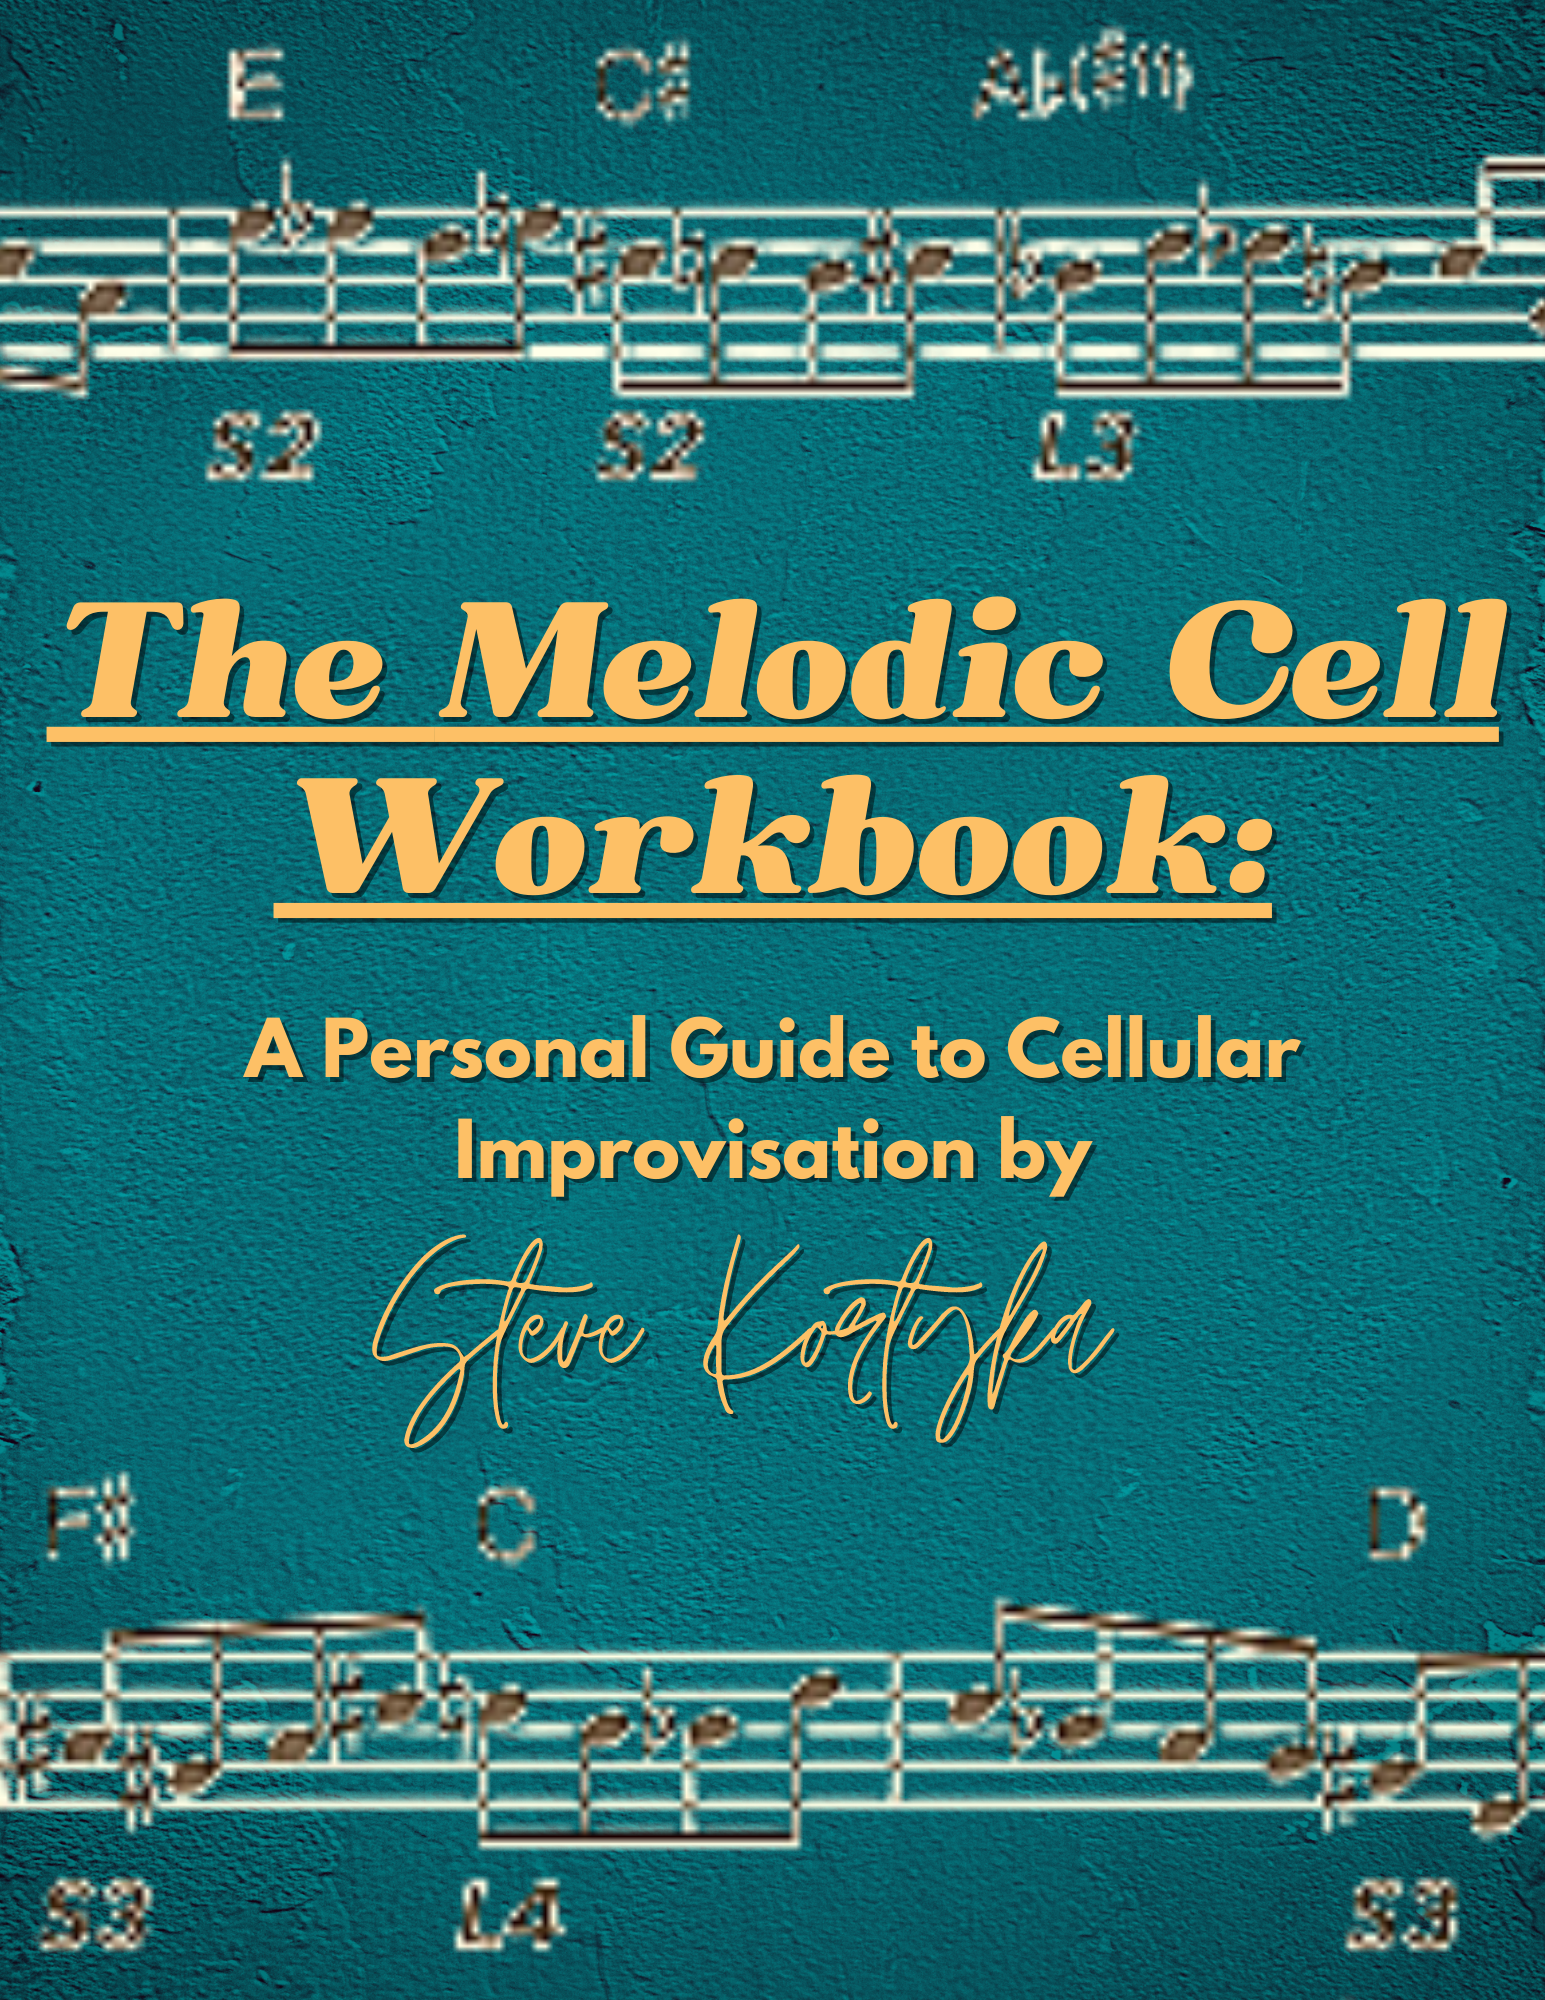 The Melodic Cell Workbook